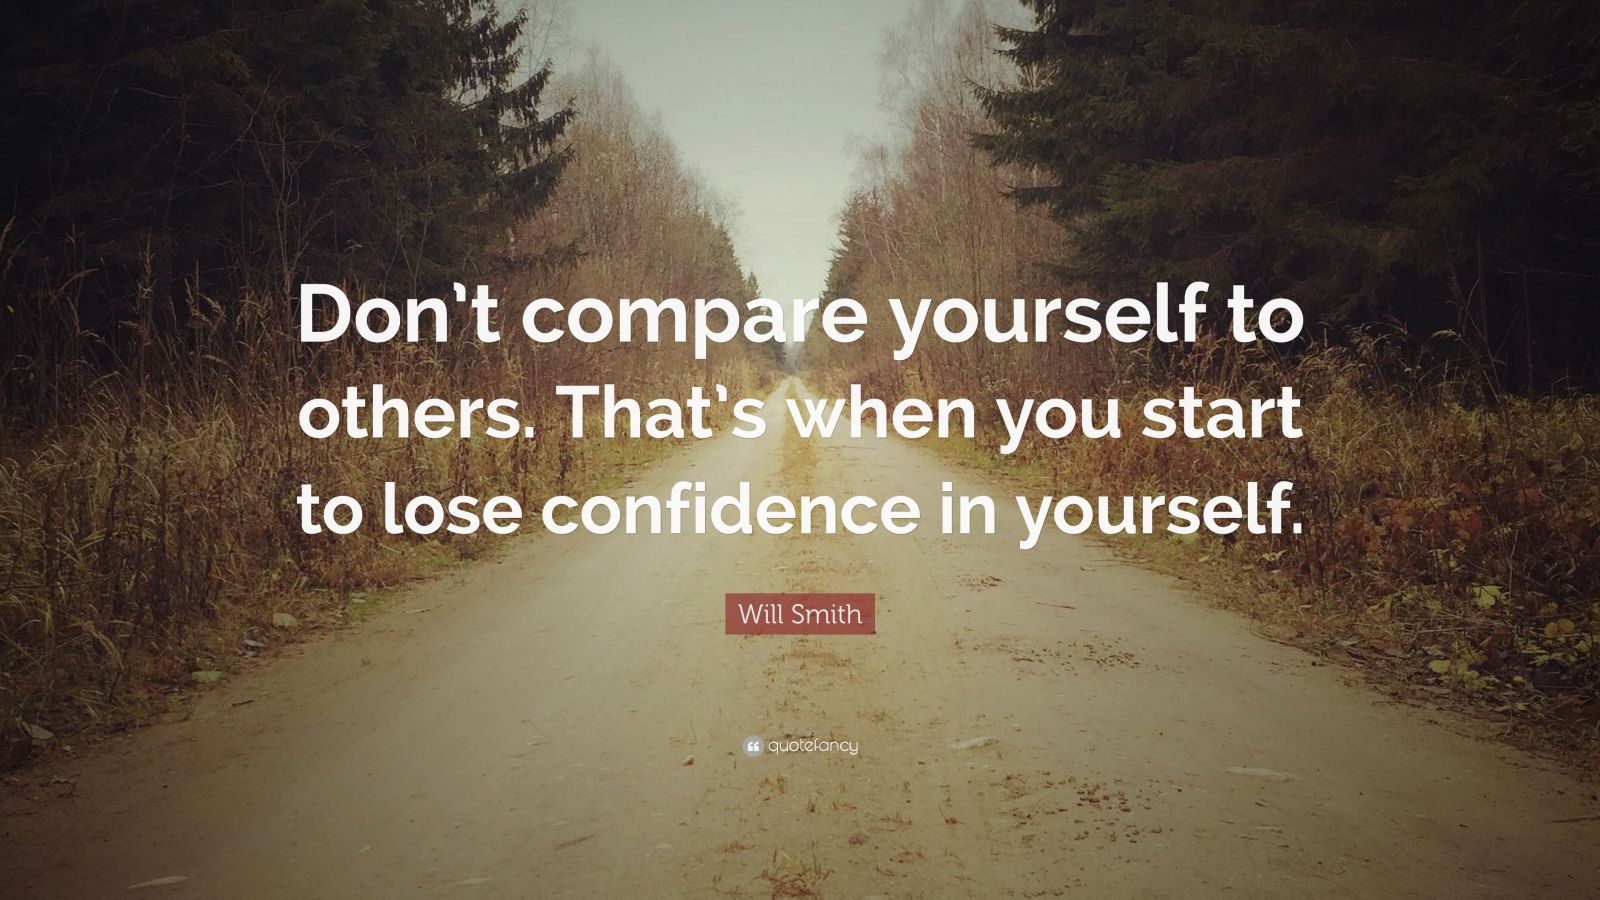 Will Smith Quote “don T Compare Yourself To Others That S When You Start To Lose Confidence In